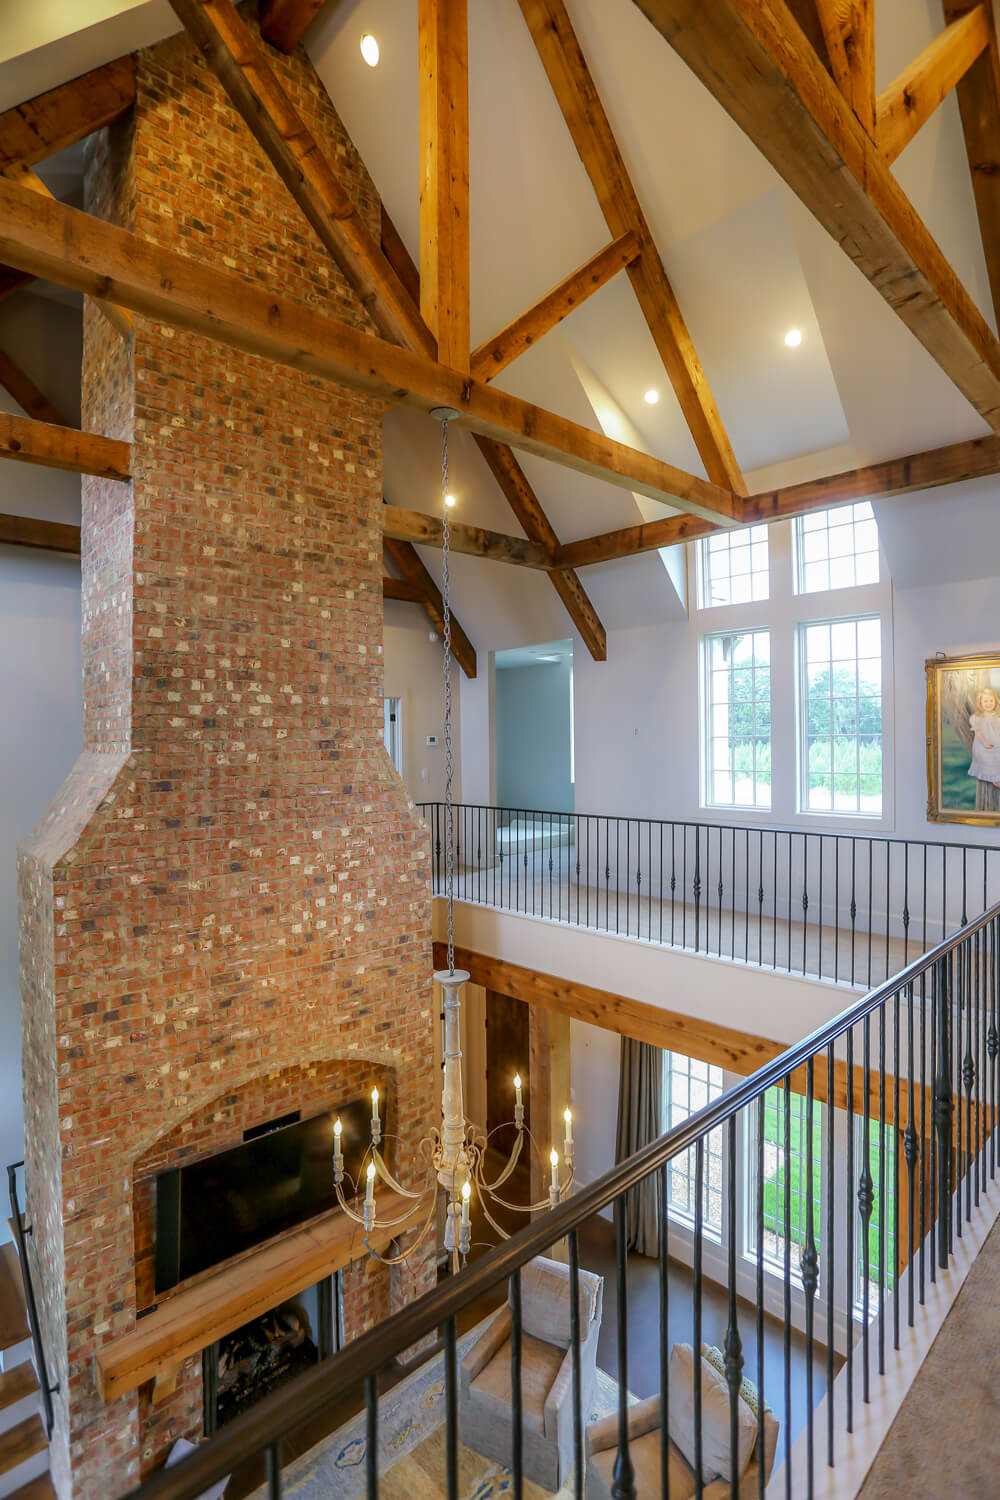 Private Residence - Wood Trusses at Fireplace - Designed by Foshee Architecture